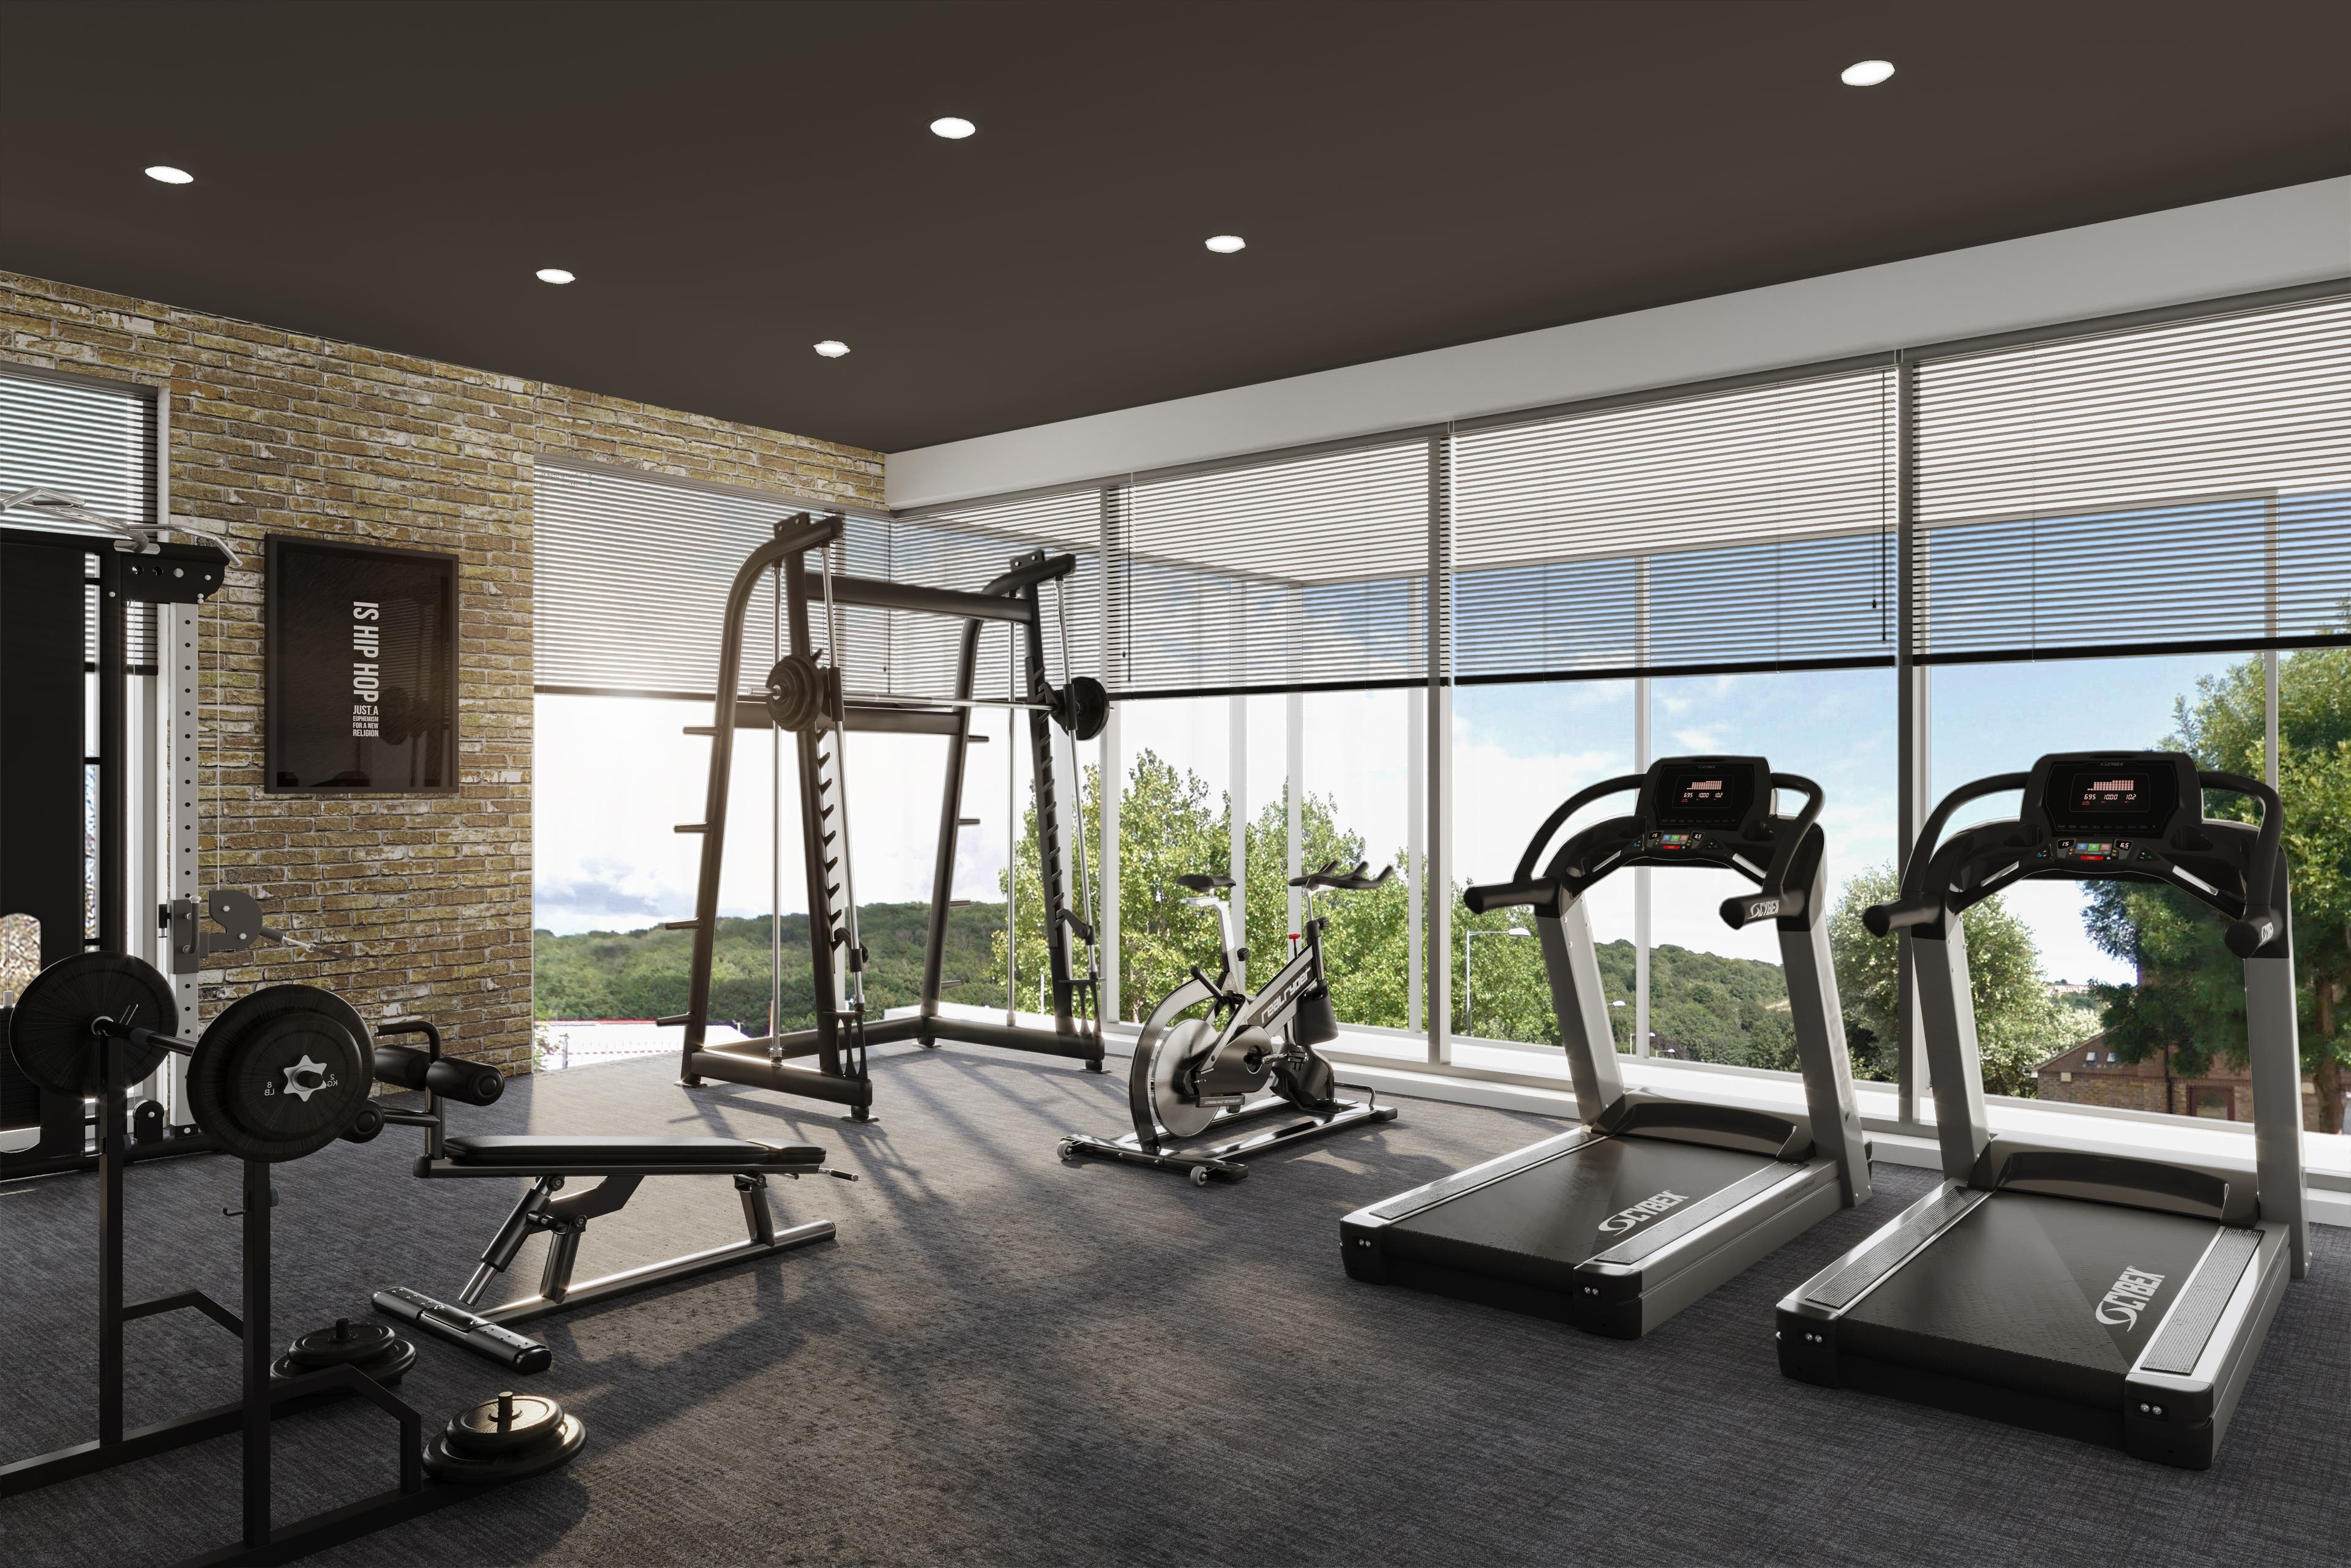 An image of an on-site gym at Student Roost.